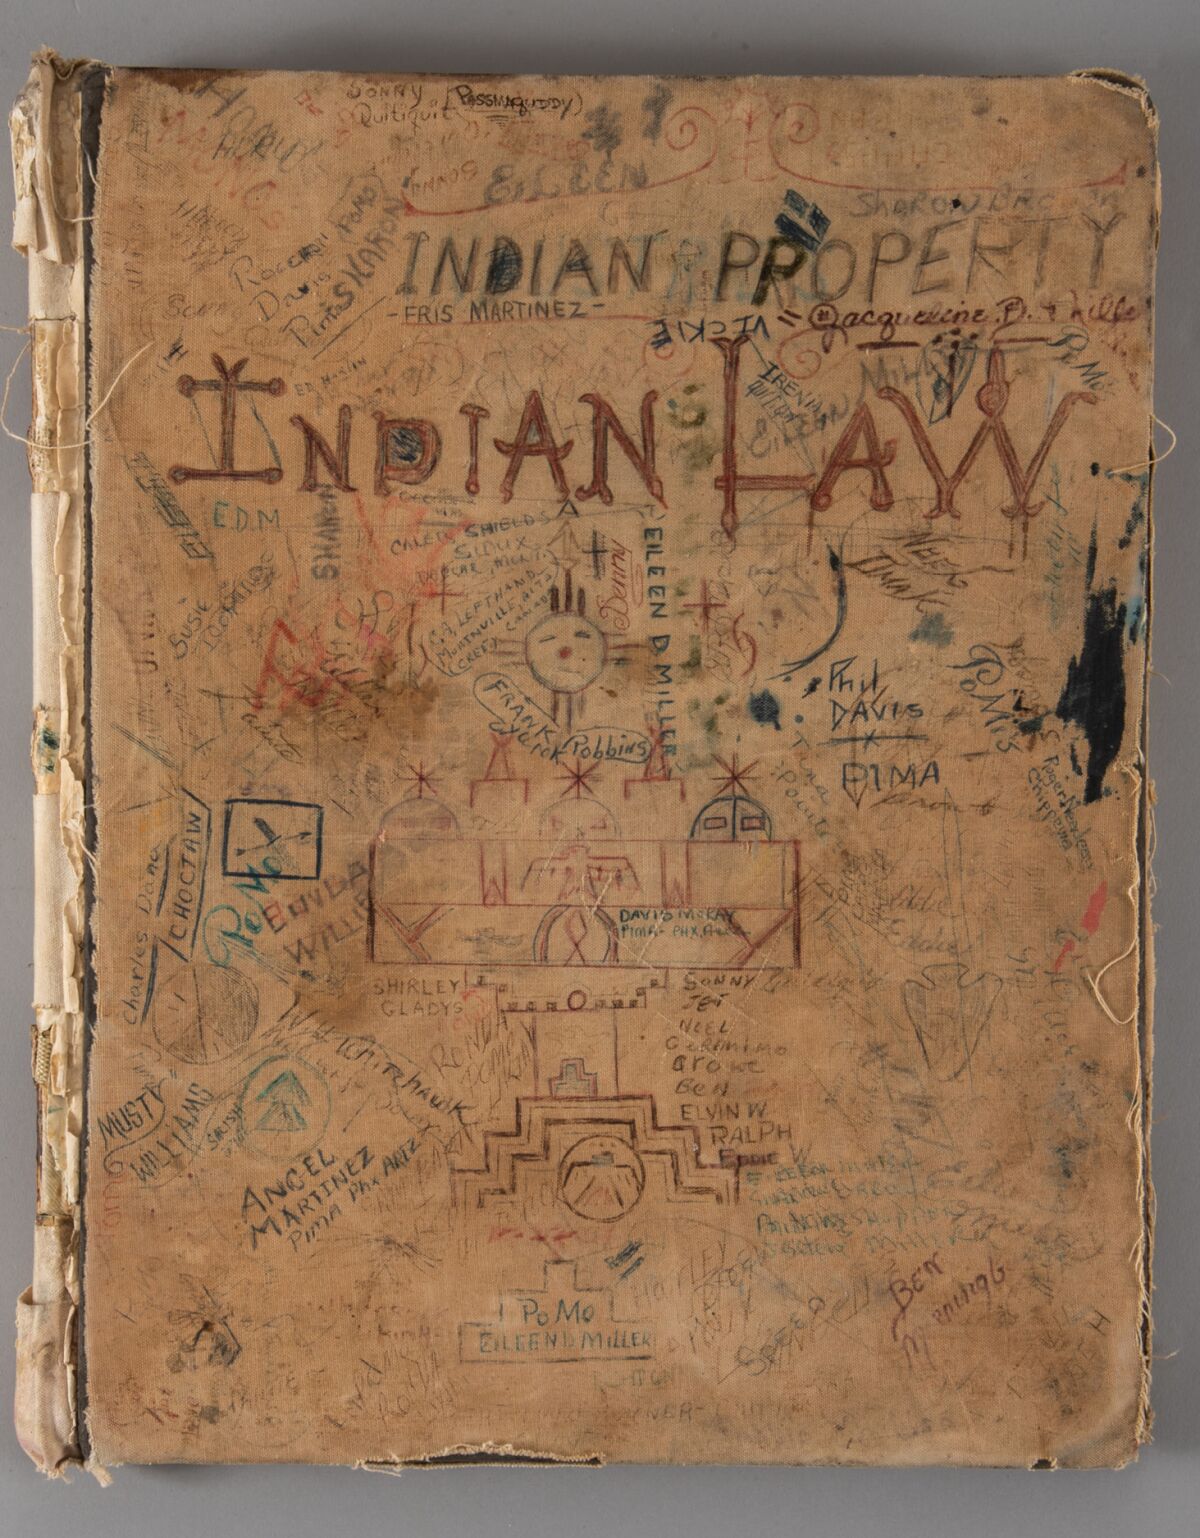 The cover of the Alcatraz Logbook features names and drawings and the words "INDIAN LAW" in capital letters in red ink